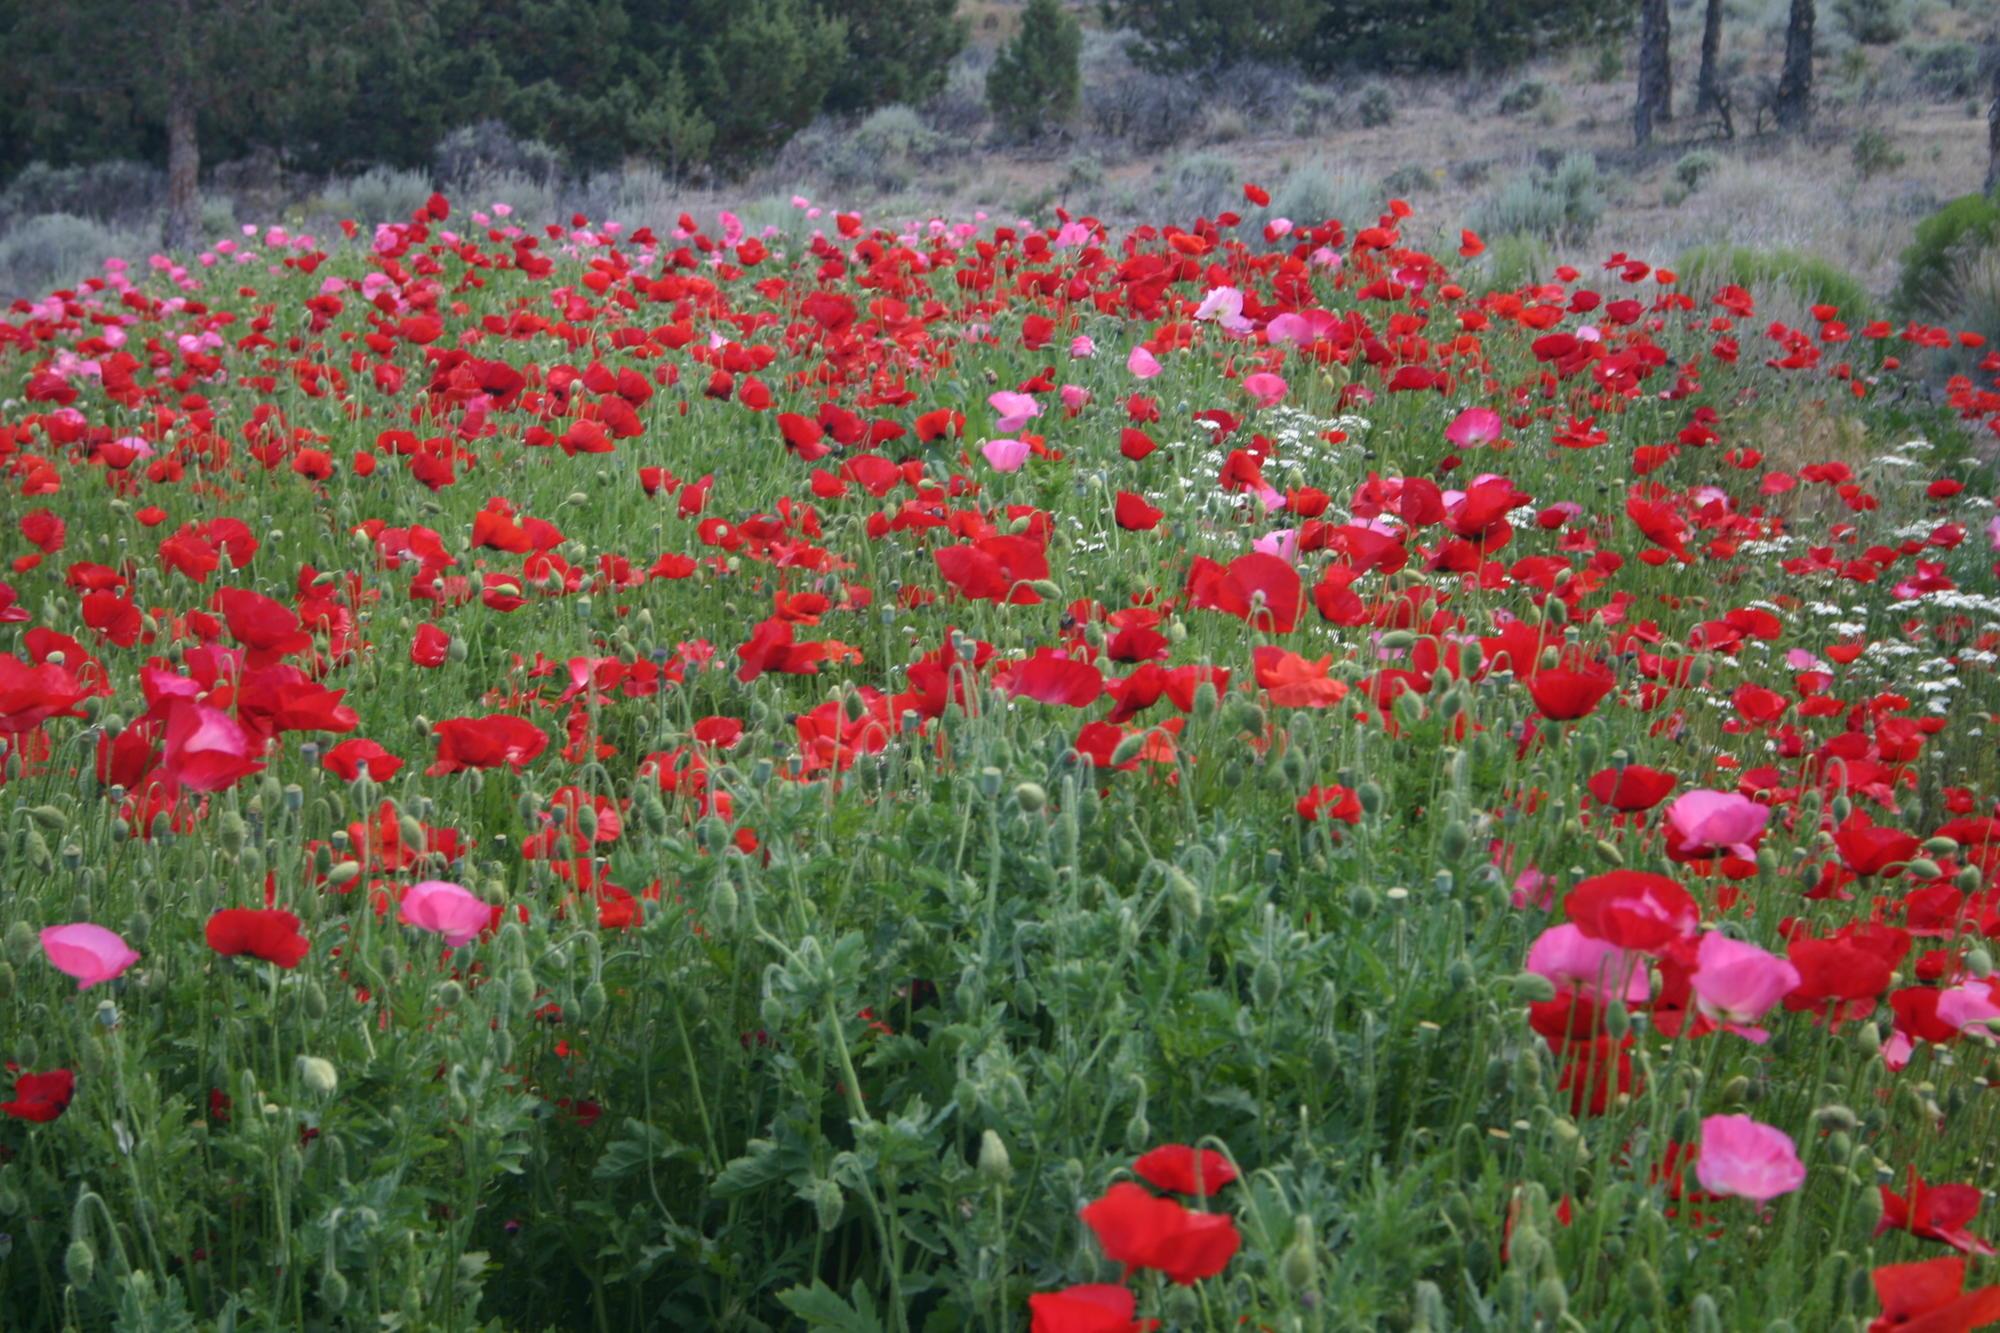 Field of wildflowers with poppies